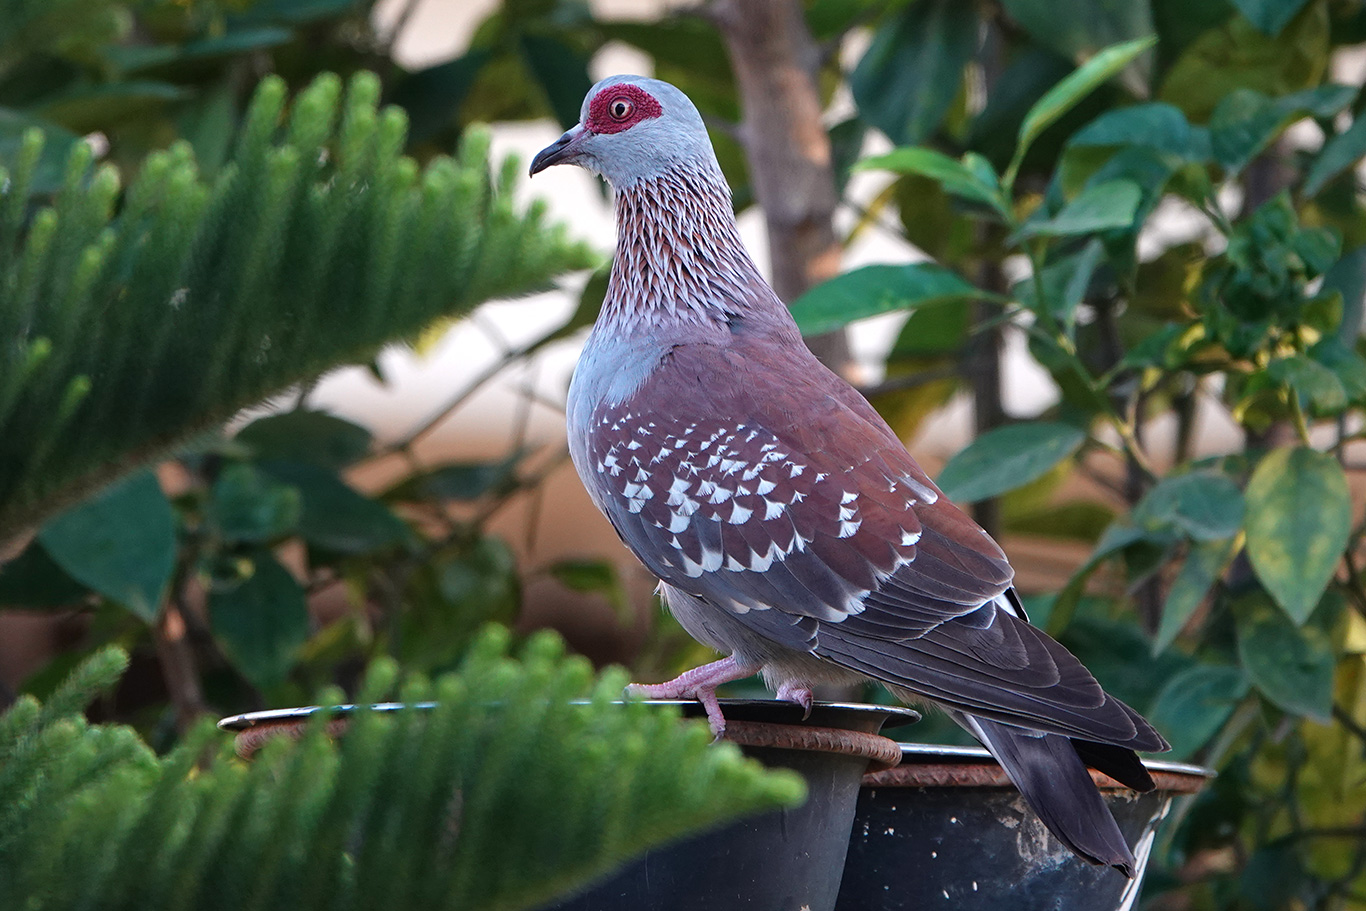 Speckled Pigeon, Brufut, The Gambia.